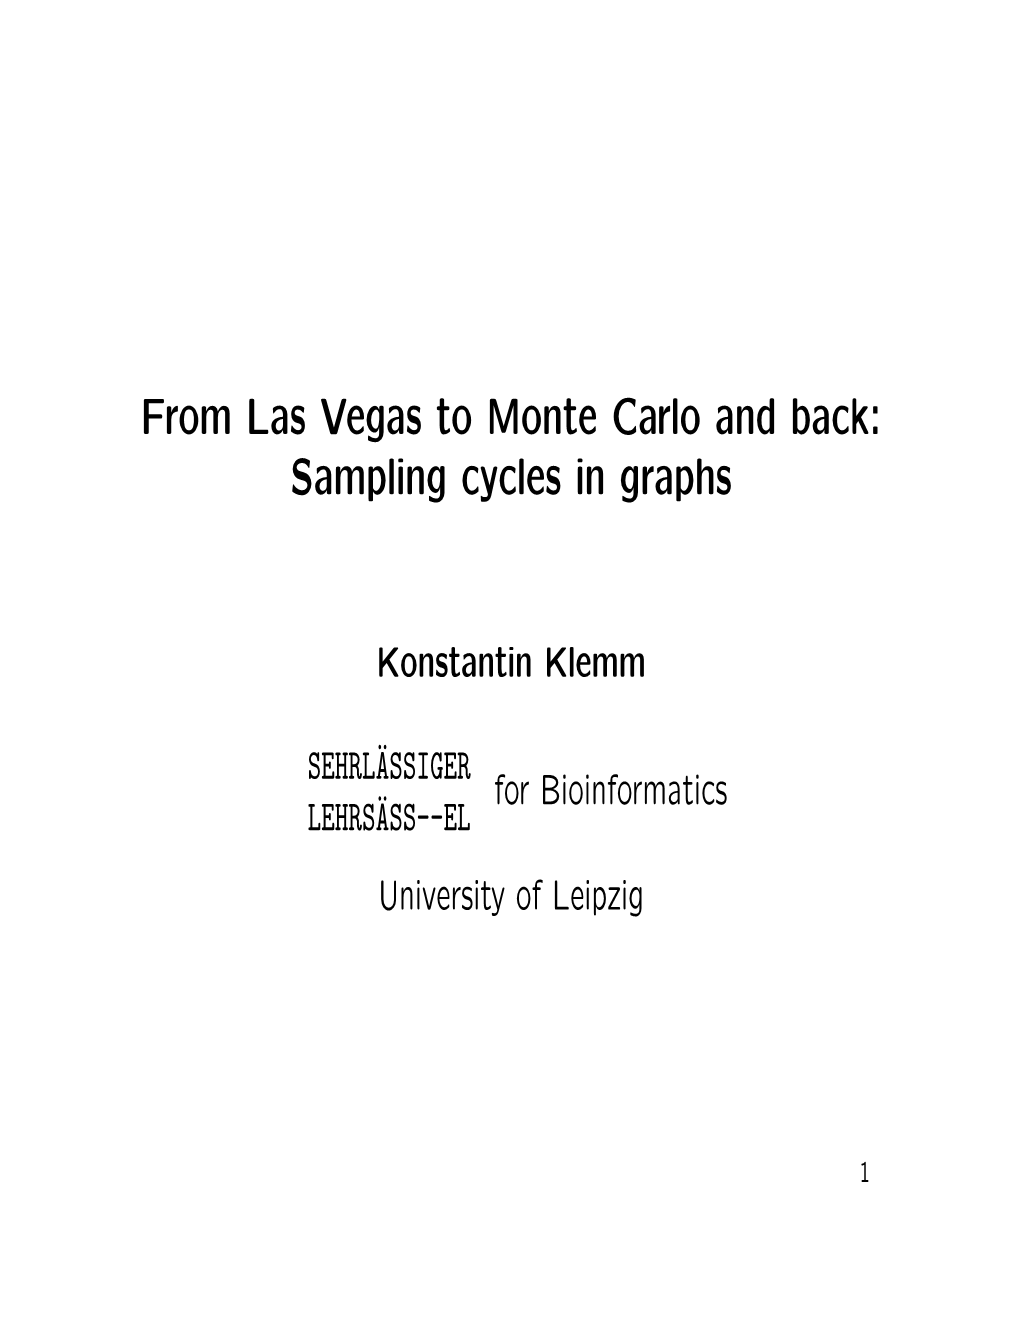 From Las Vegas to Monte Carlo and Back: Sampling Cycles in Graphs